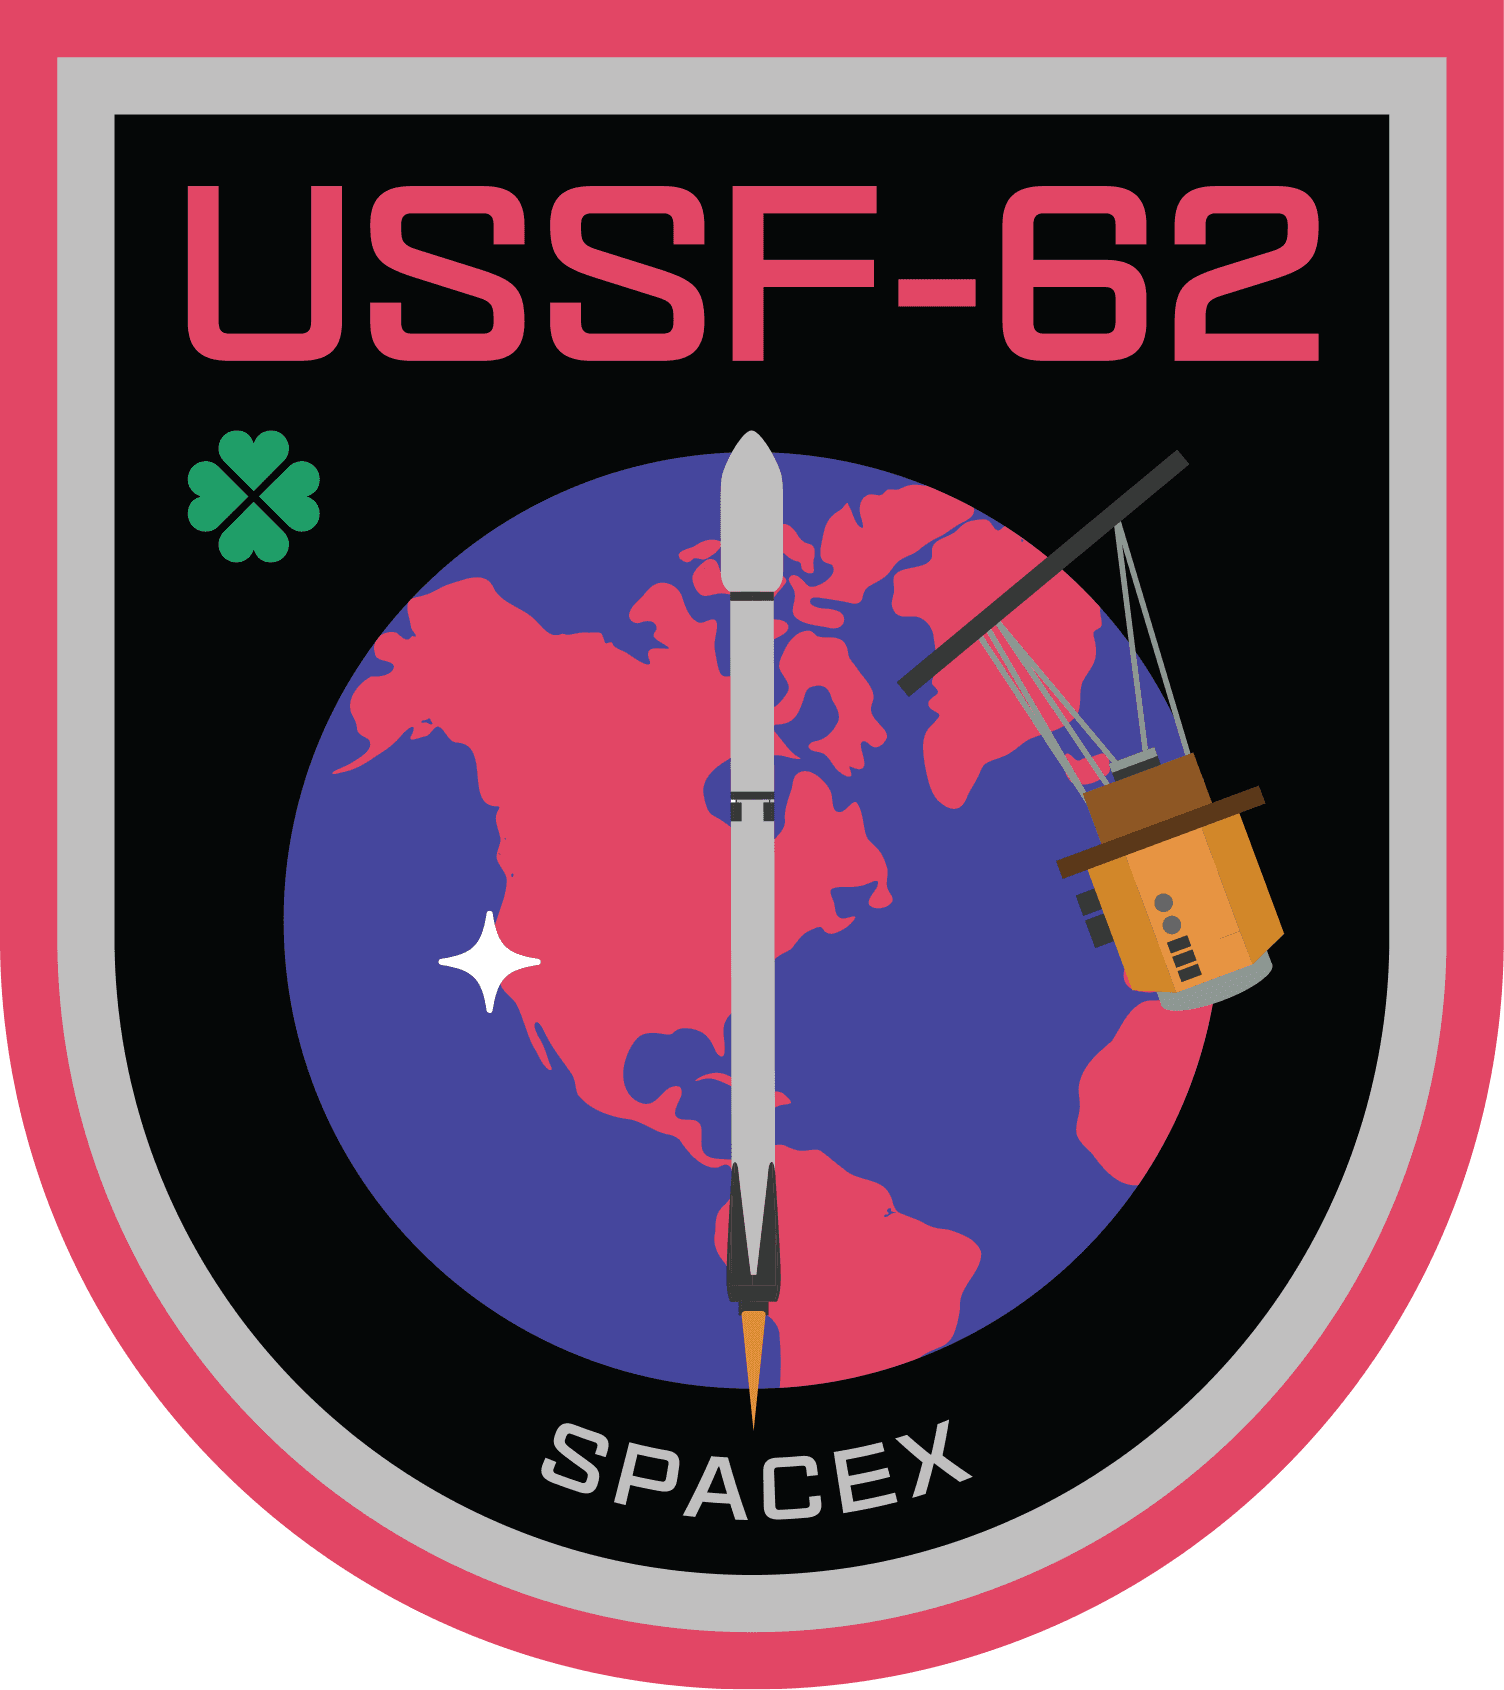 Mission patch USSF-62